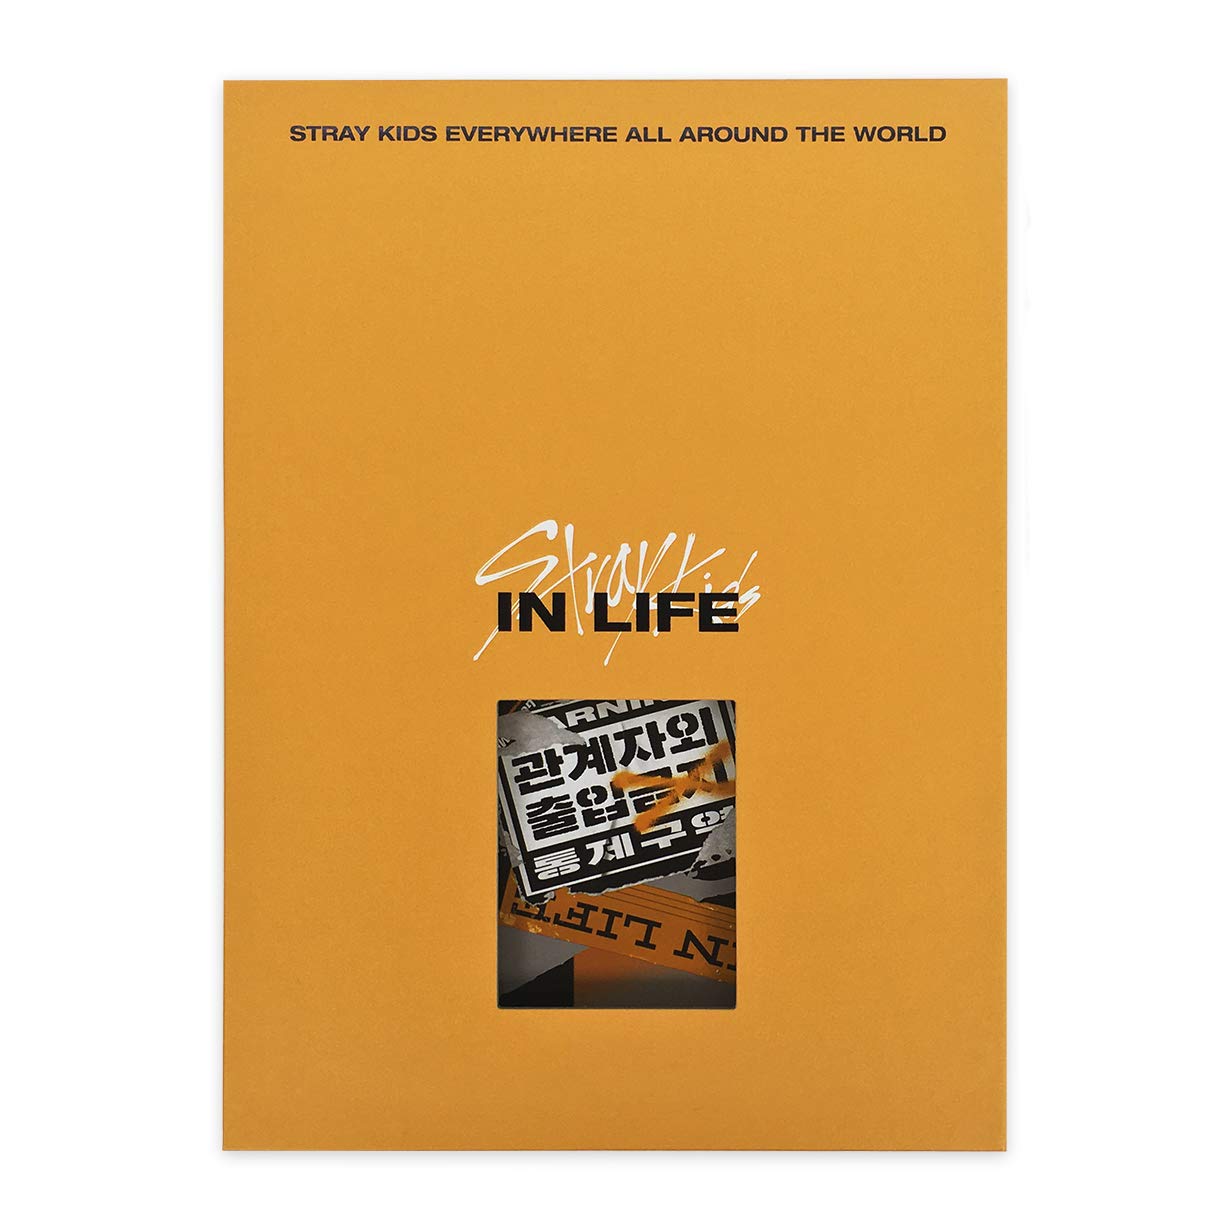 STRAY KIDS 1ST ALBUM REPACKAGE 'IN生 (IN LIFE)' B TYPE VERSION COVER